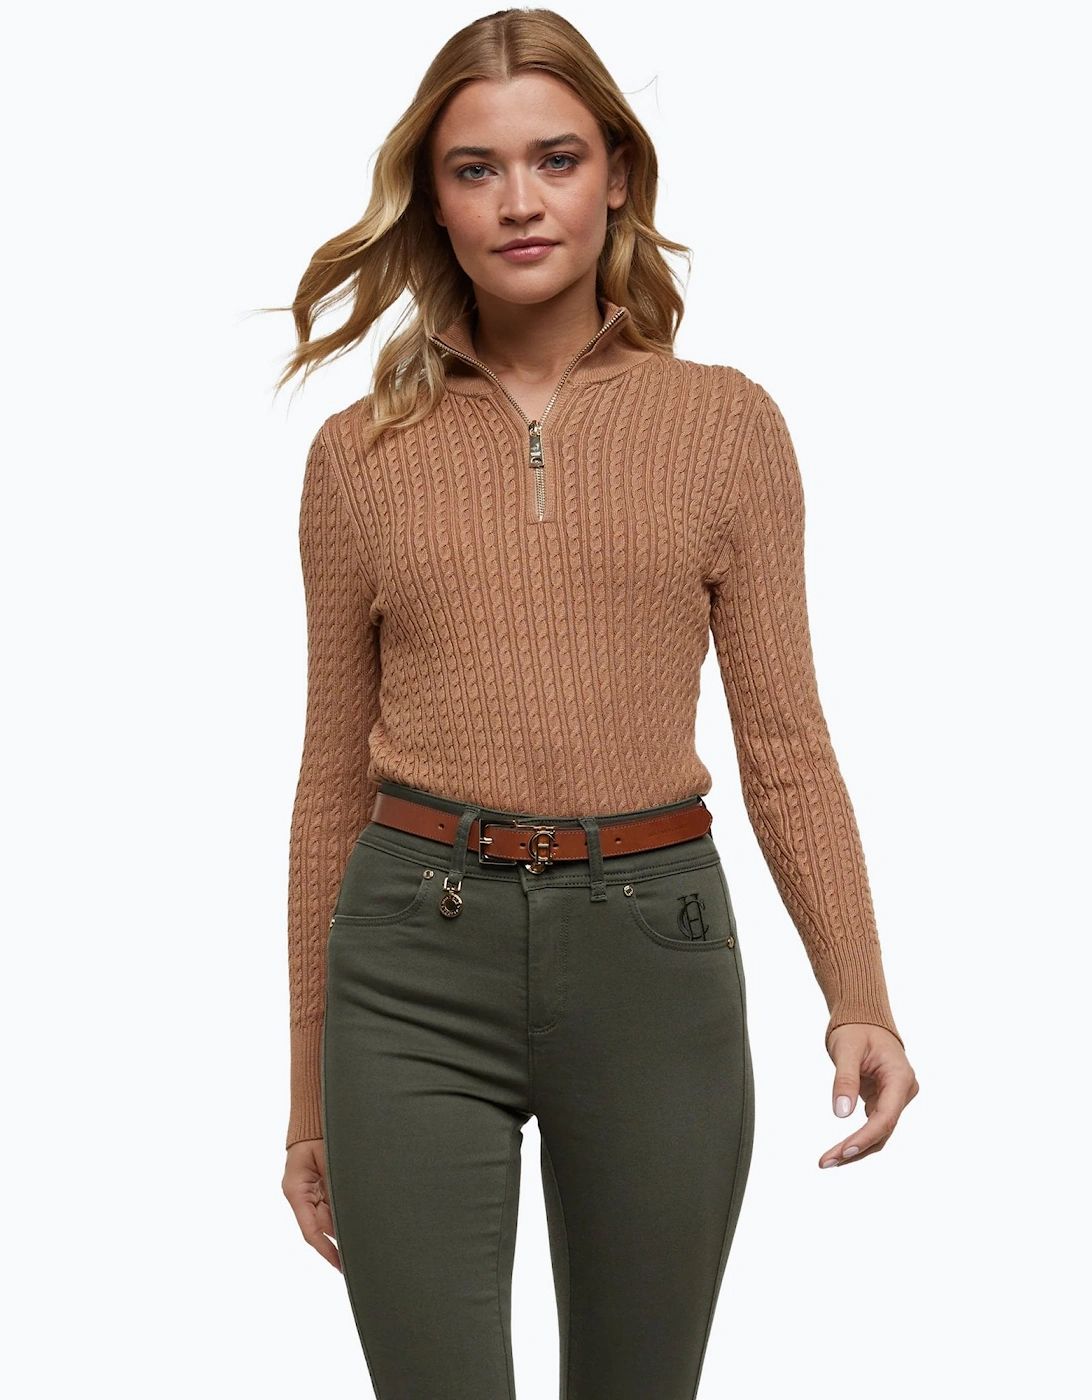 Ava Half Zip Camel Cable Knit